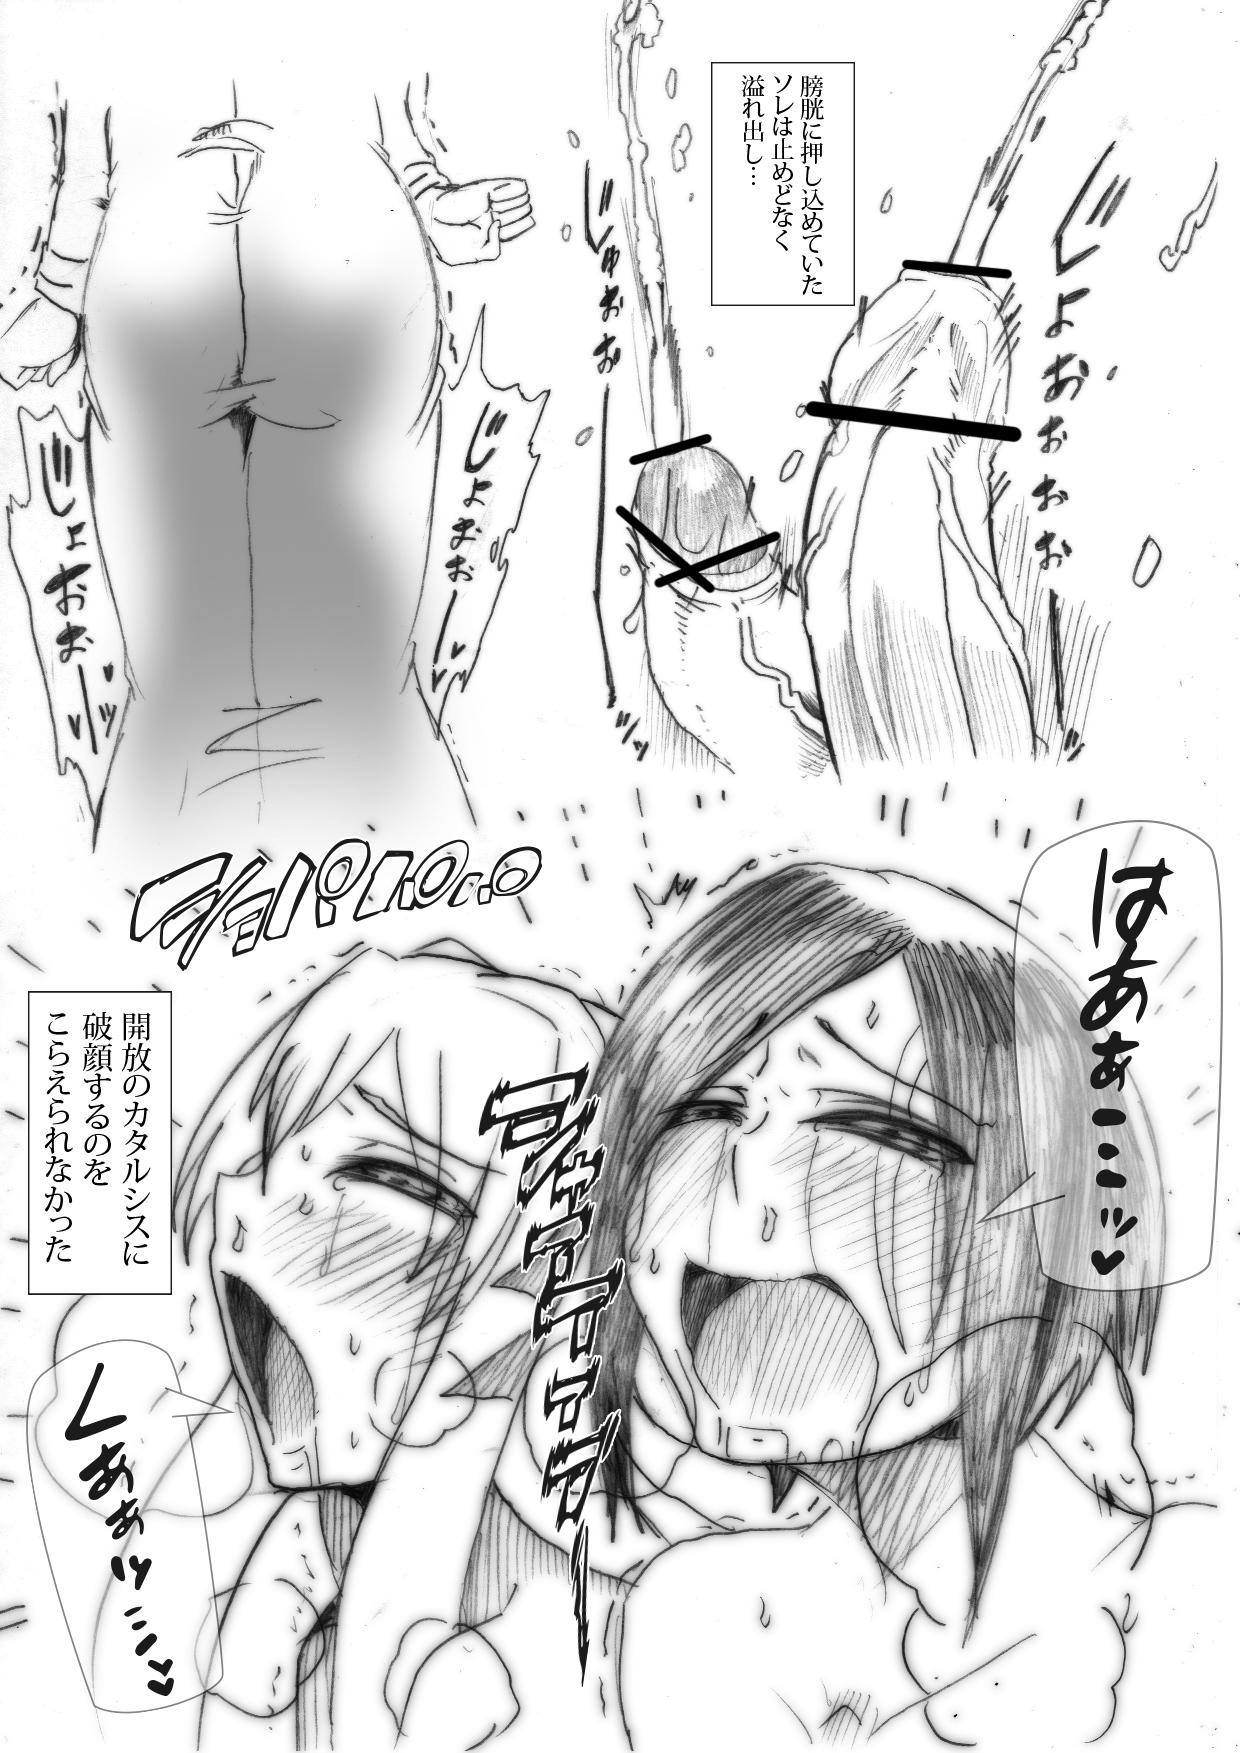 Wet Cunt Ame Ame Fure Fure 2 - Original Trap - Page 7